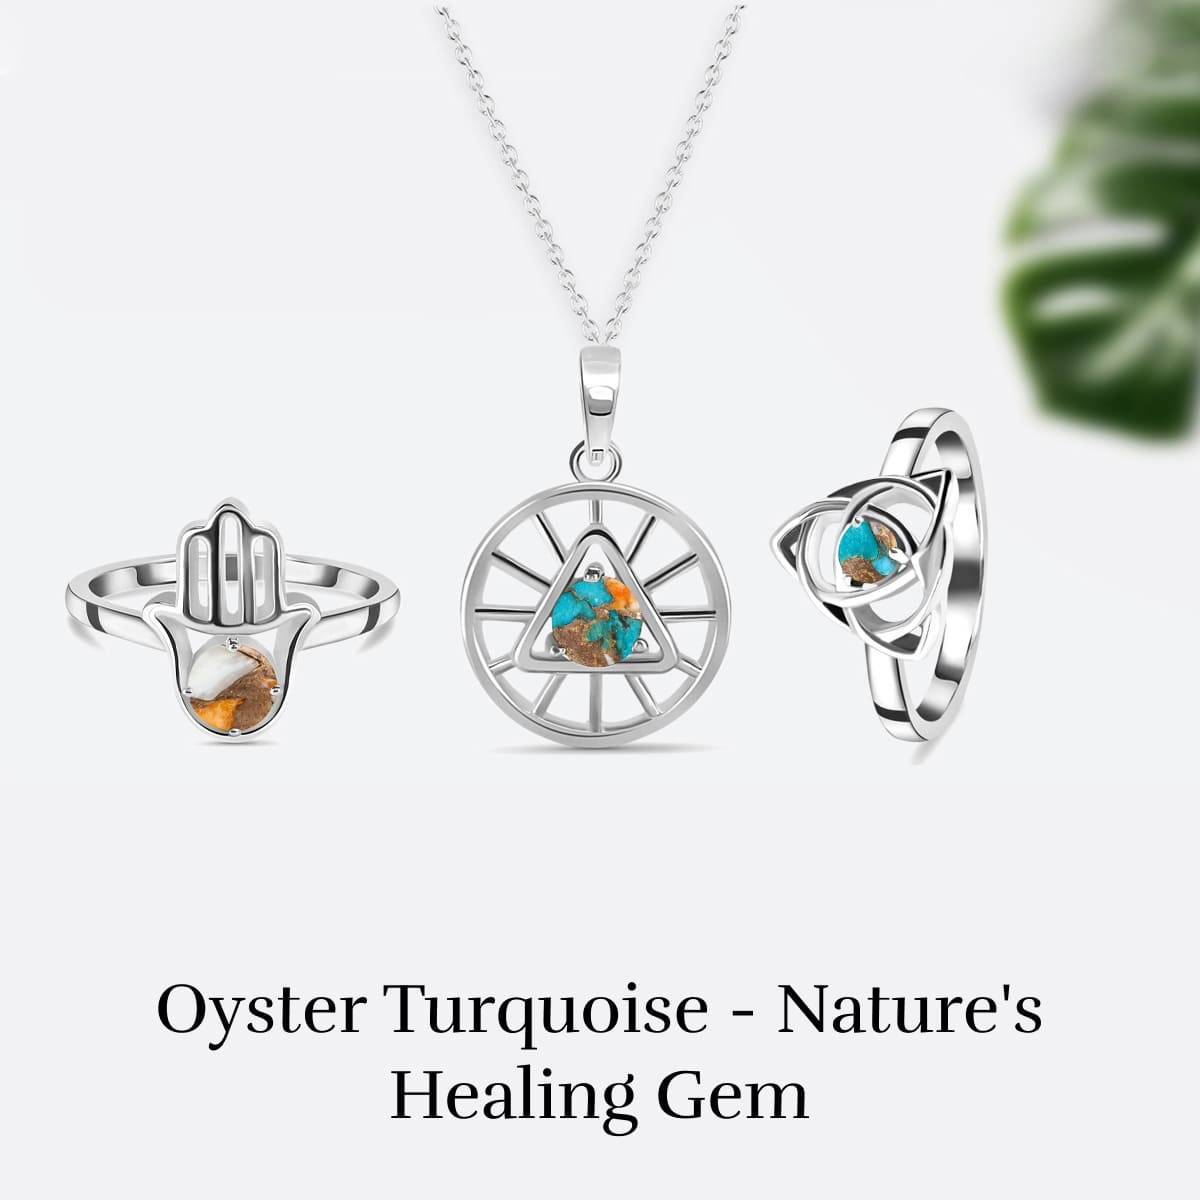 Oyster Turquoise Stone Healing properties